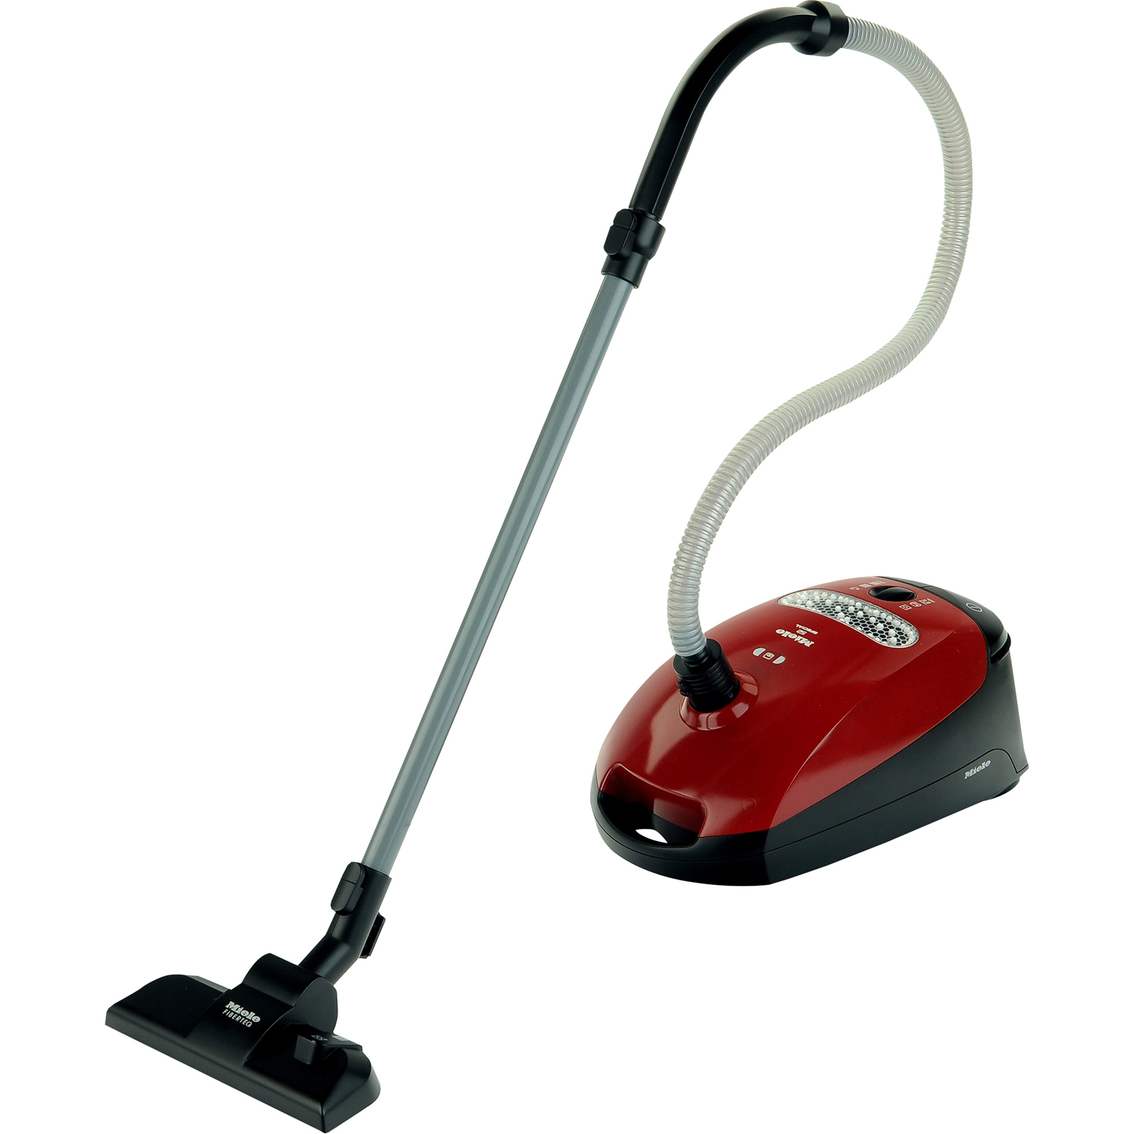 Miele Vacuum Toy - Image 2 of 3